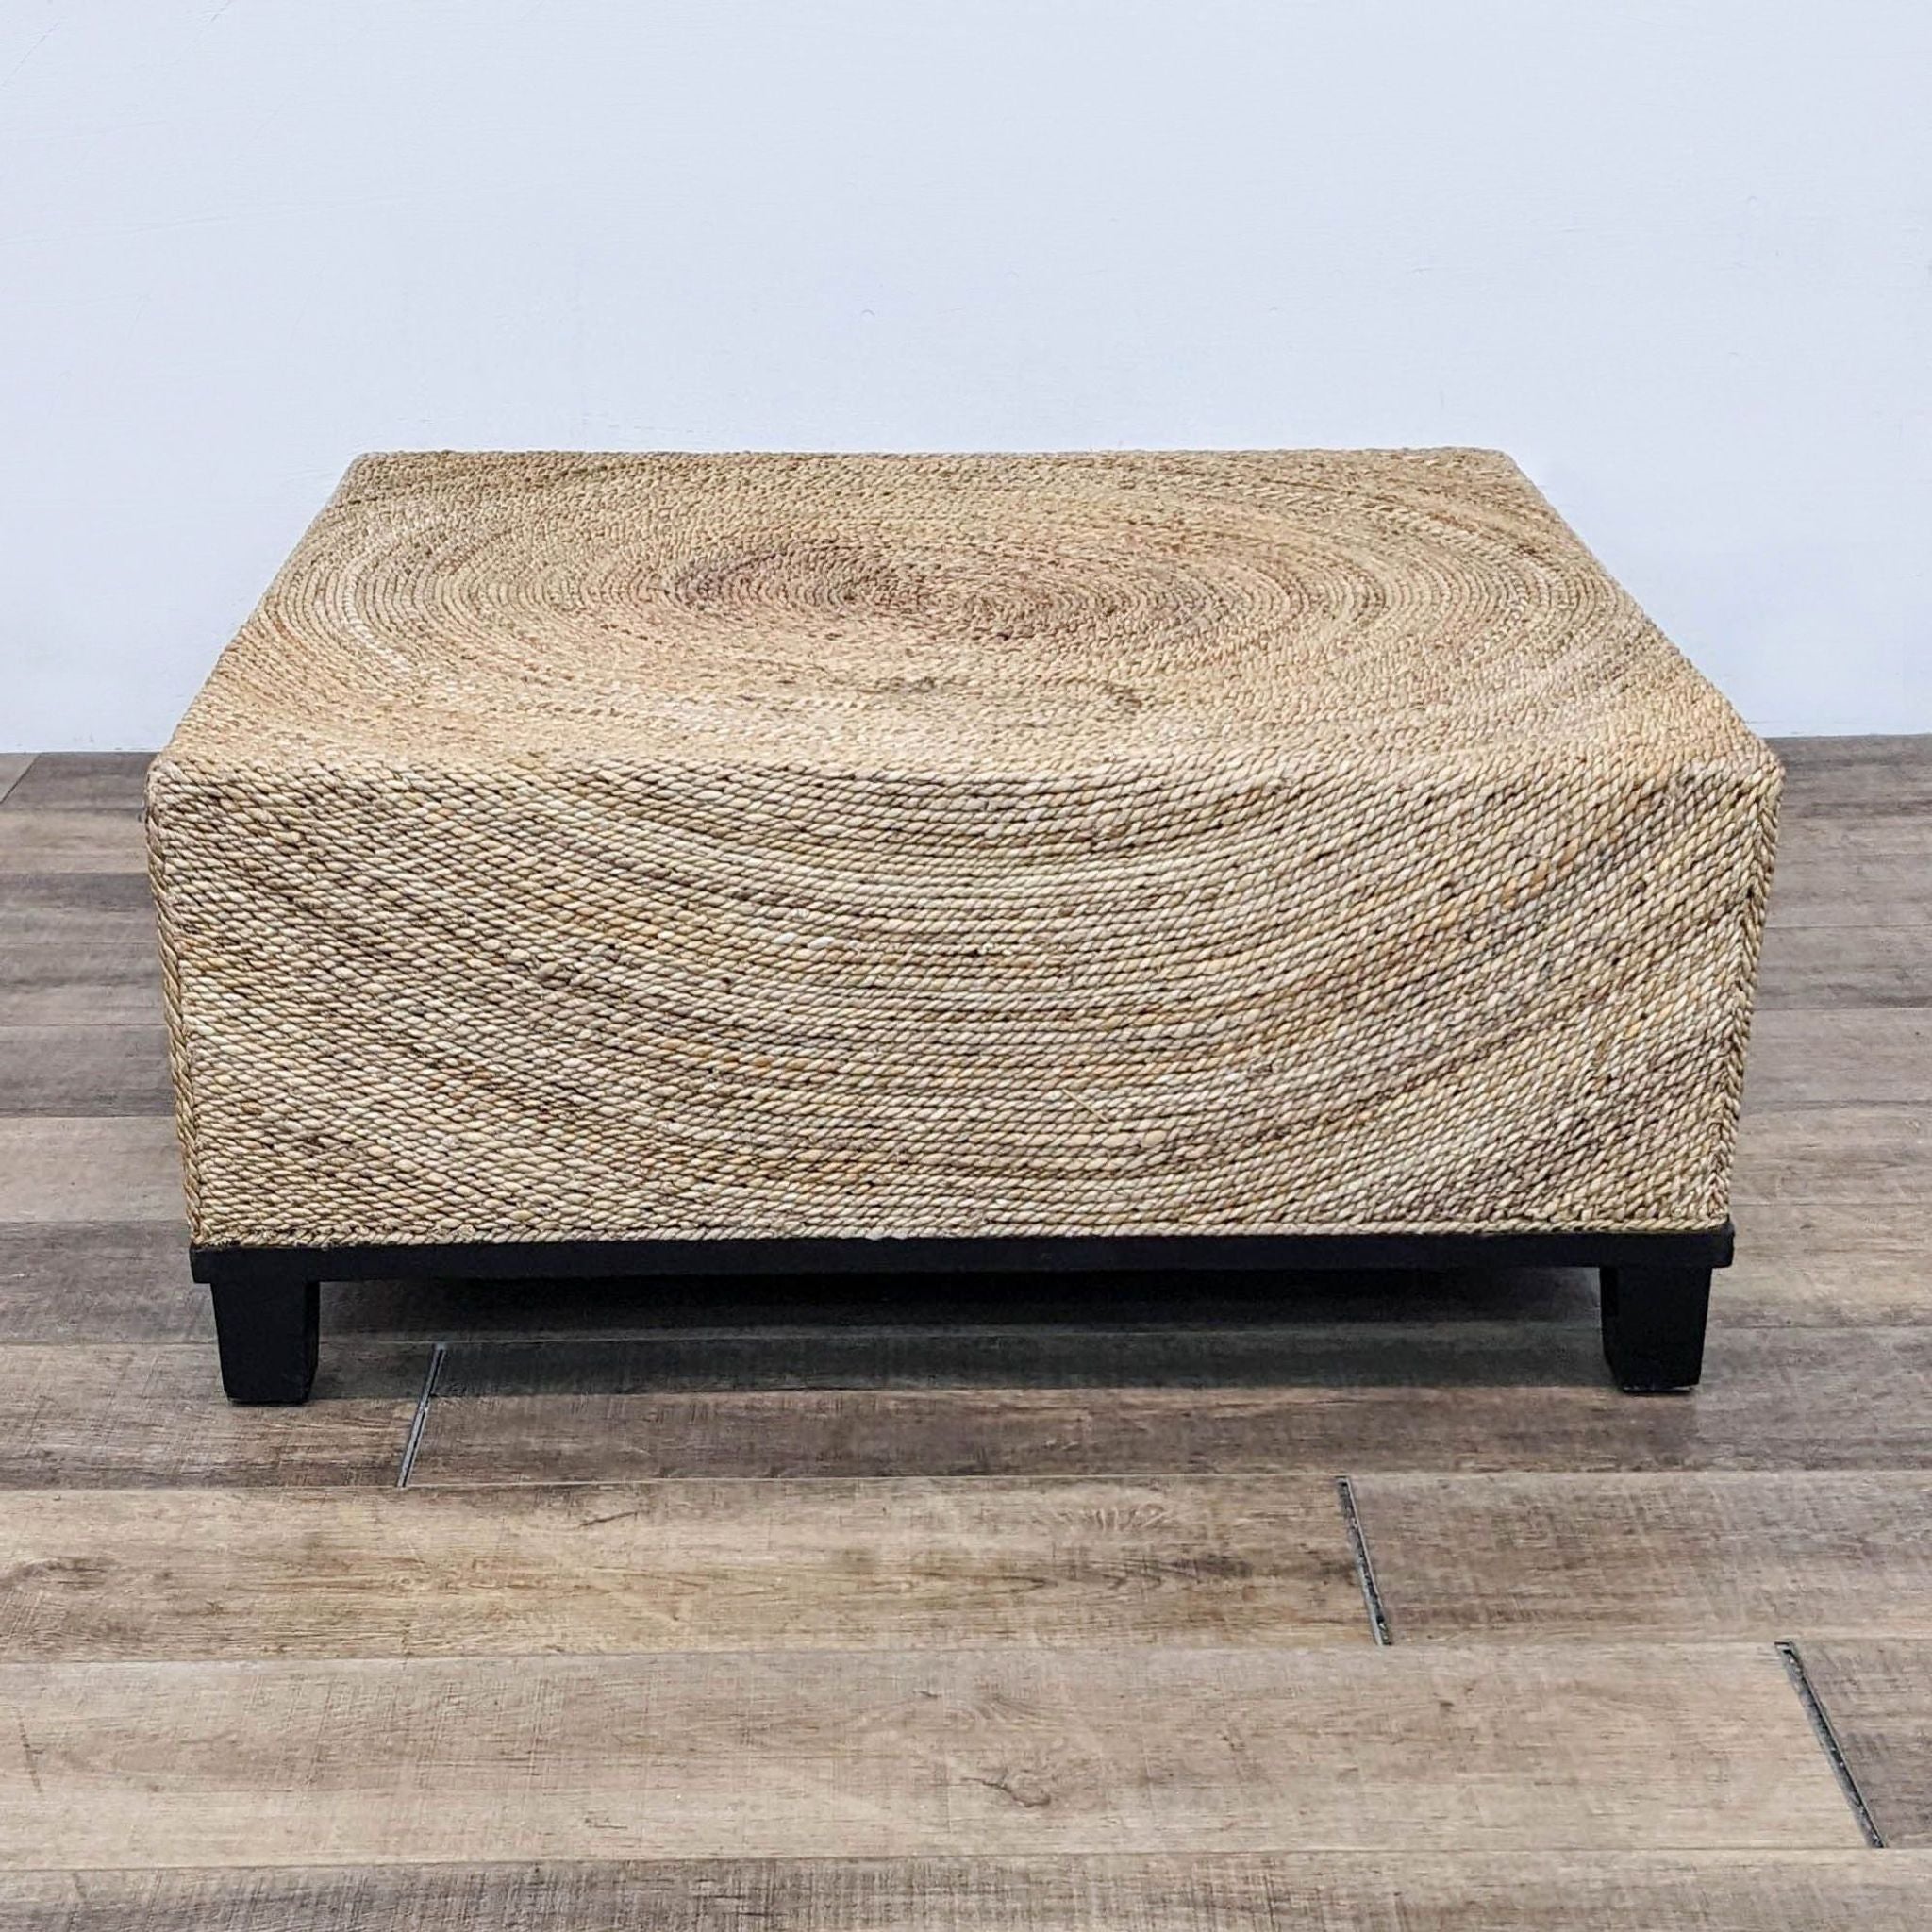 Reperch brand coffee table with natural fiber woven top and black legs on a wooden floor.